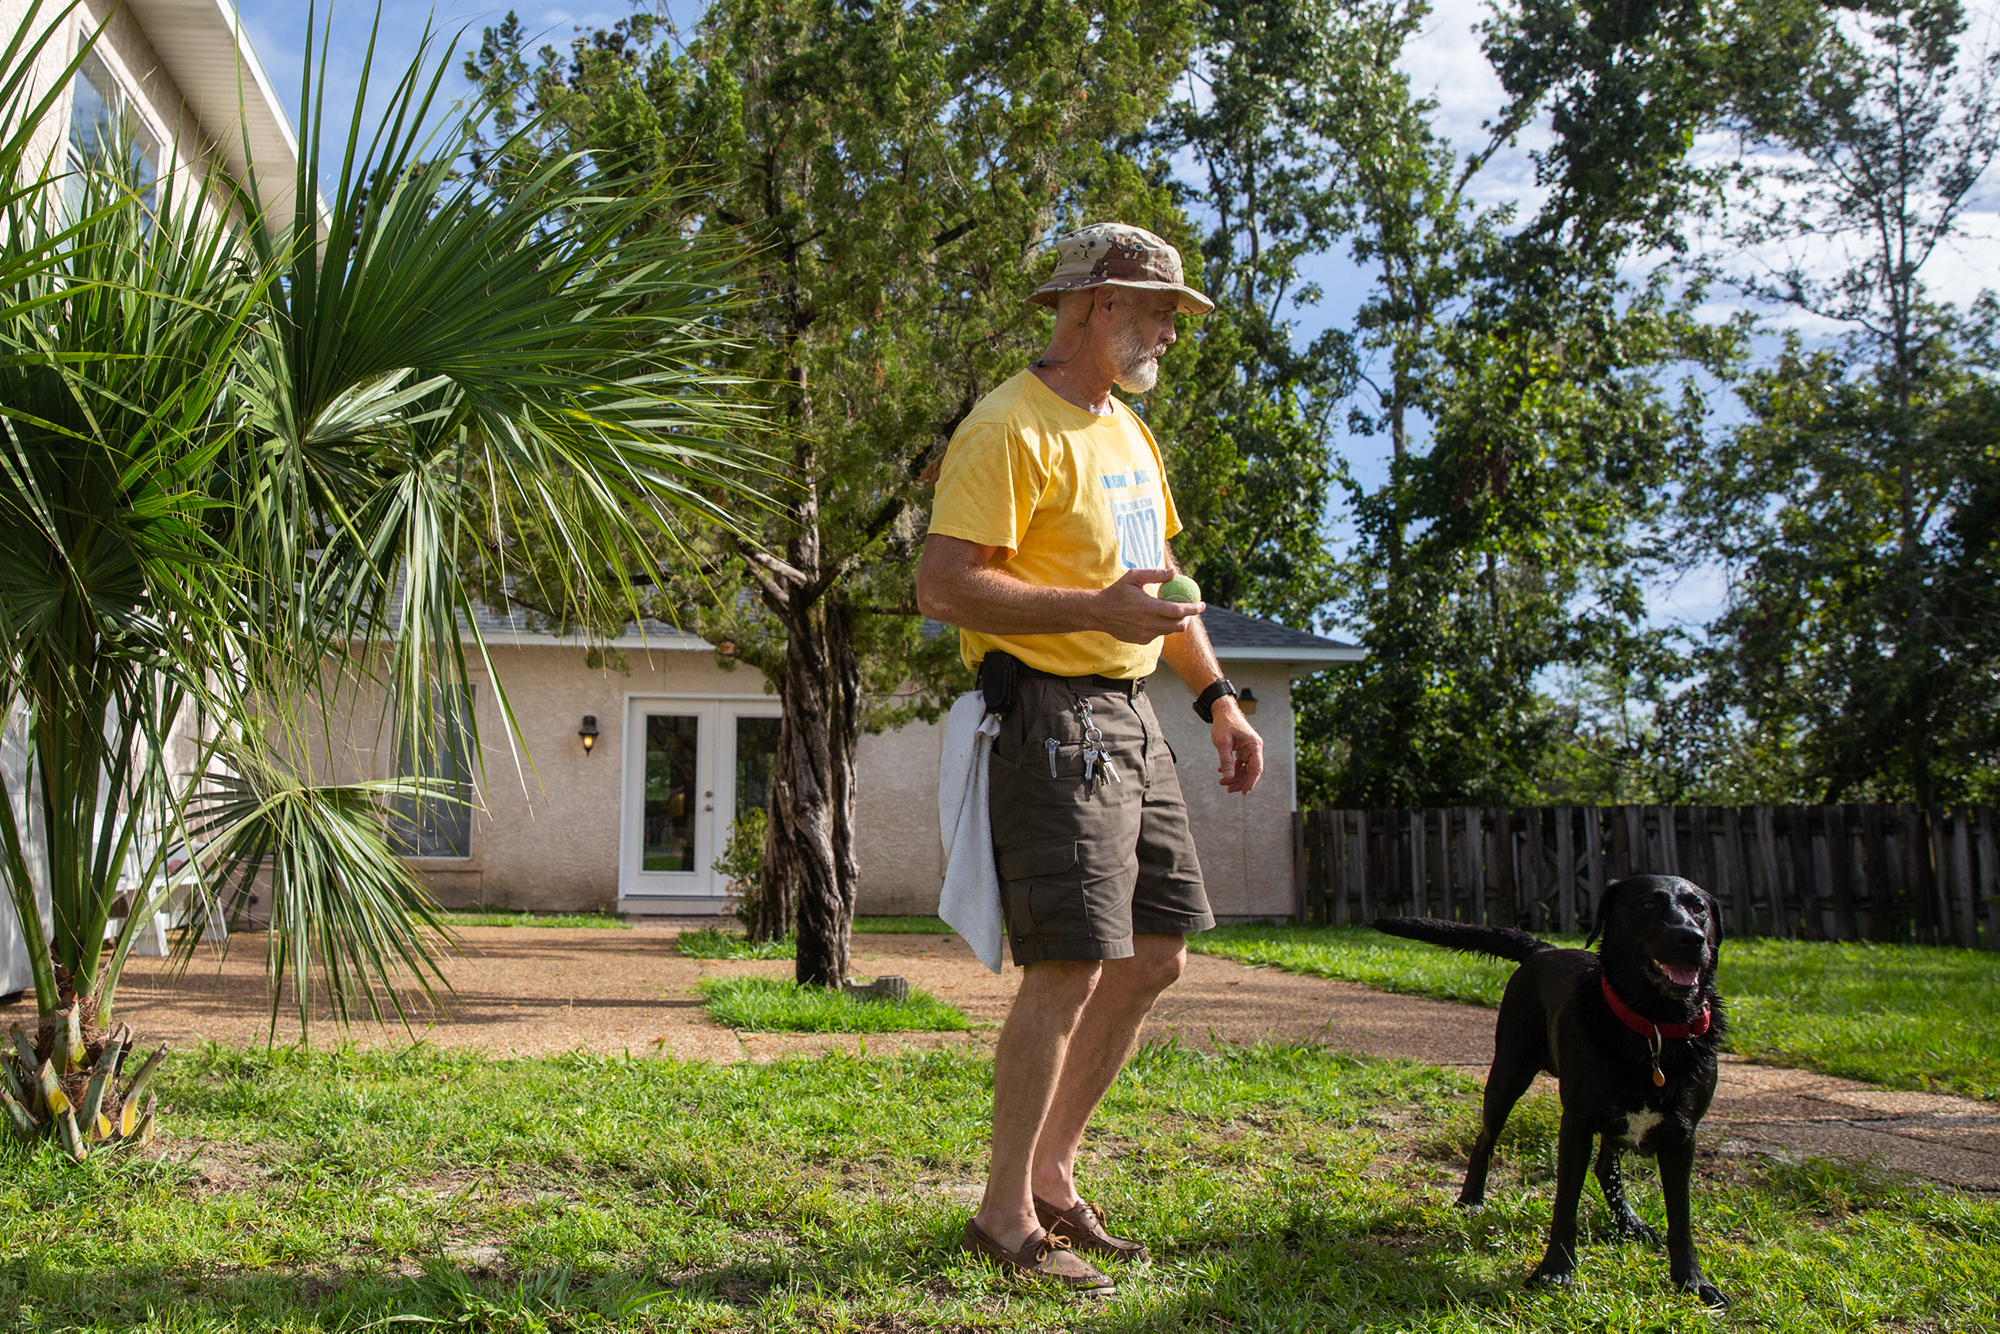 Ted Mahoney and his dog, Sadie, rode out Hurricane Michael in October 2018. His roof has been repaired but little has been done inside, even though Mahoney said his insuror paid a contractor for the work. (Stacy Fernández/News21)